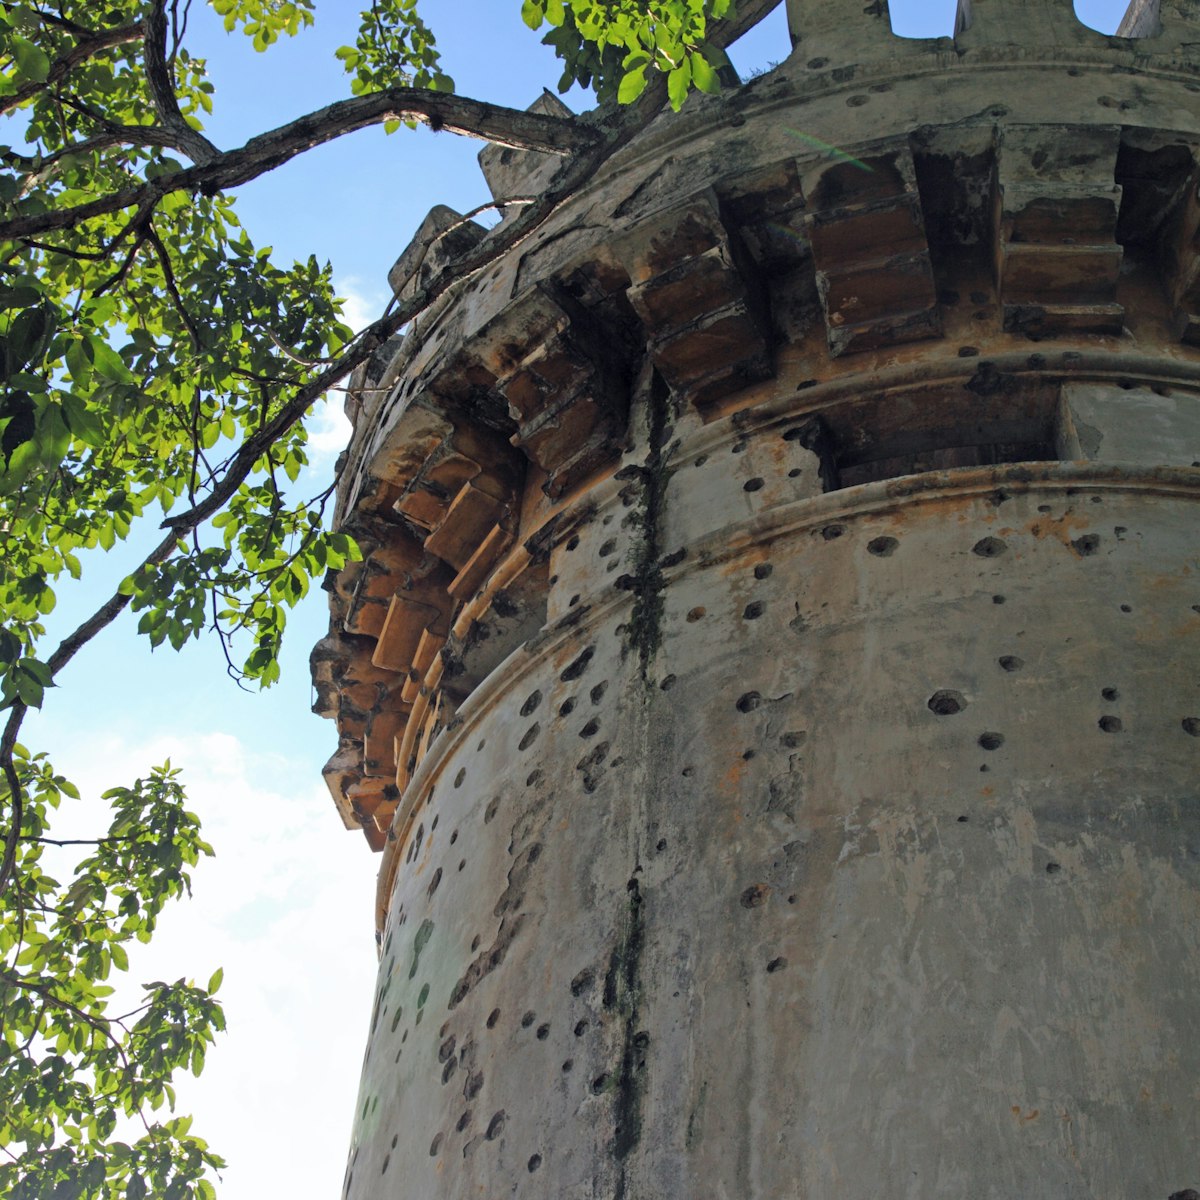 Spanish colonial era tower with battlements and multiple bullet holes, National Museum of Costa Rica.